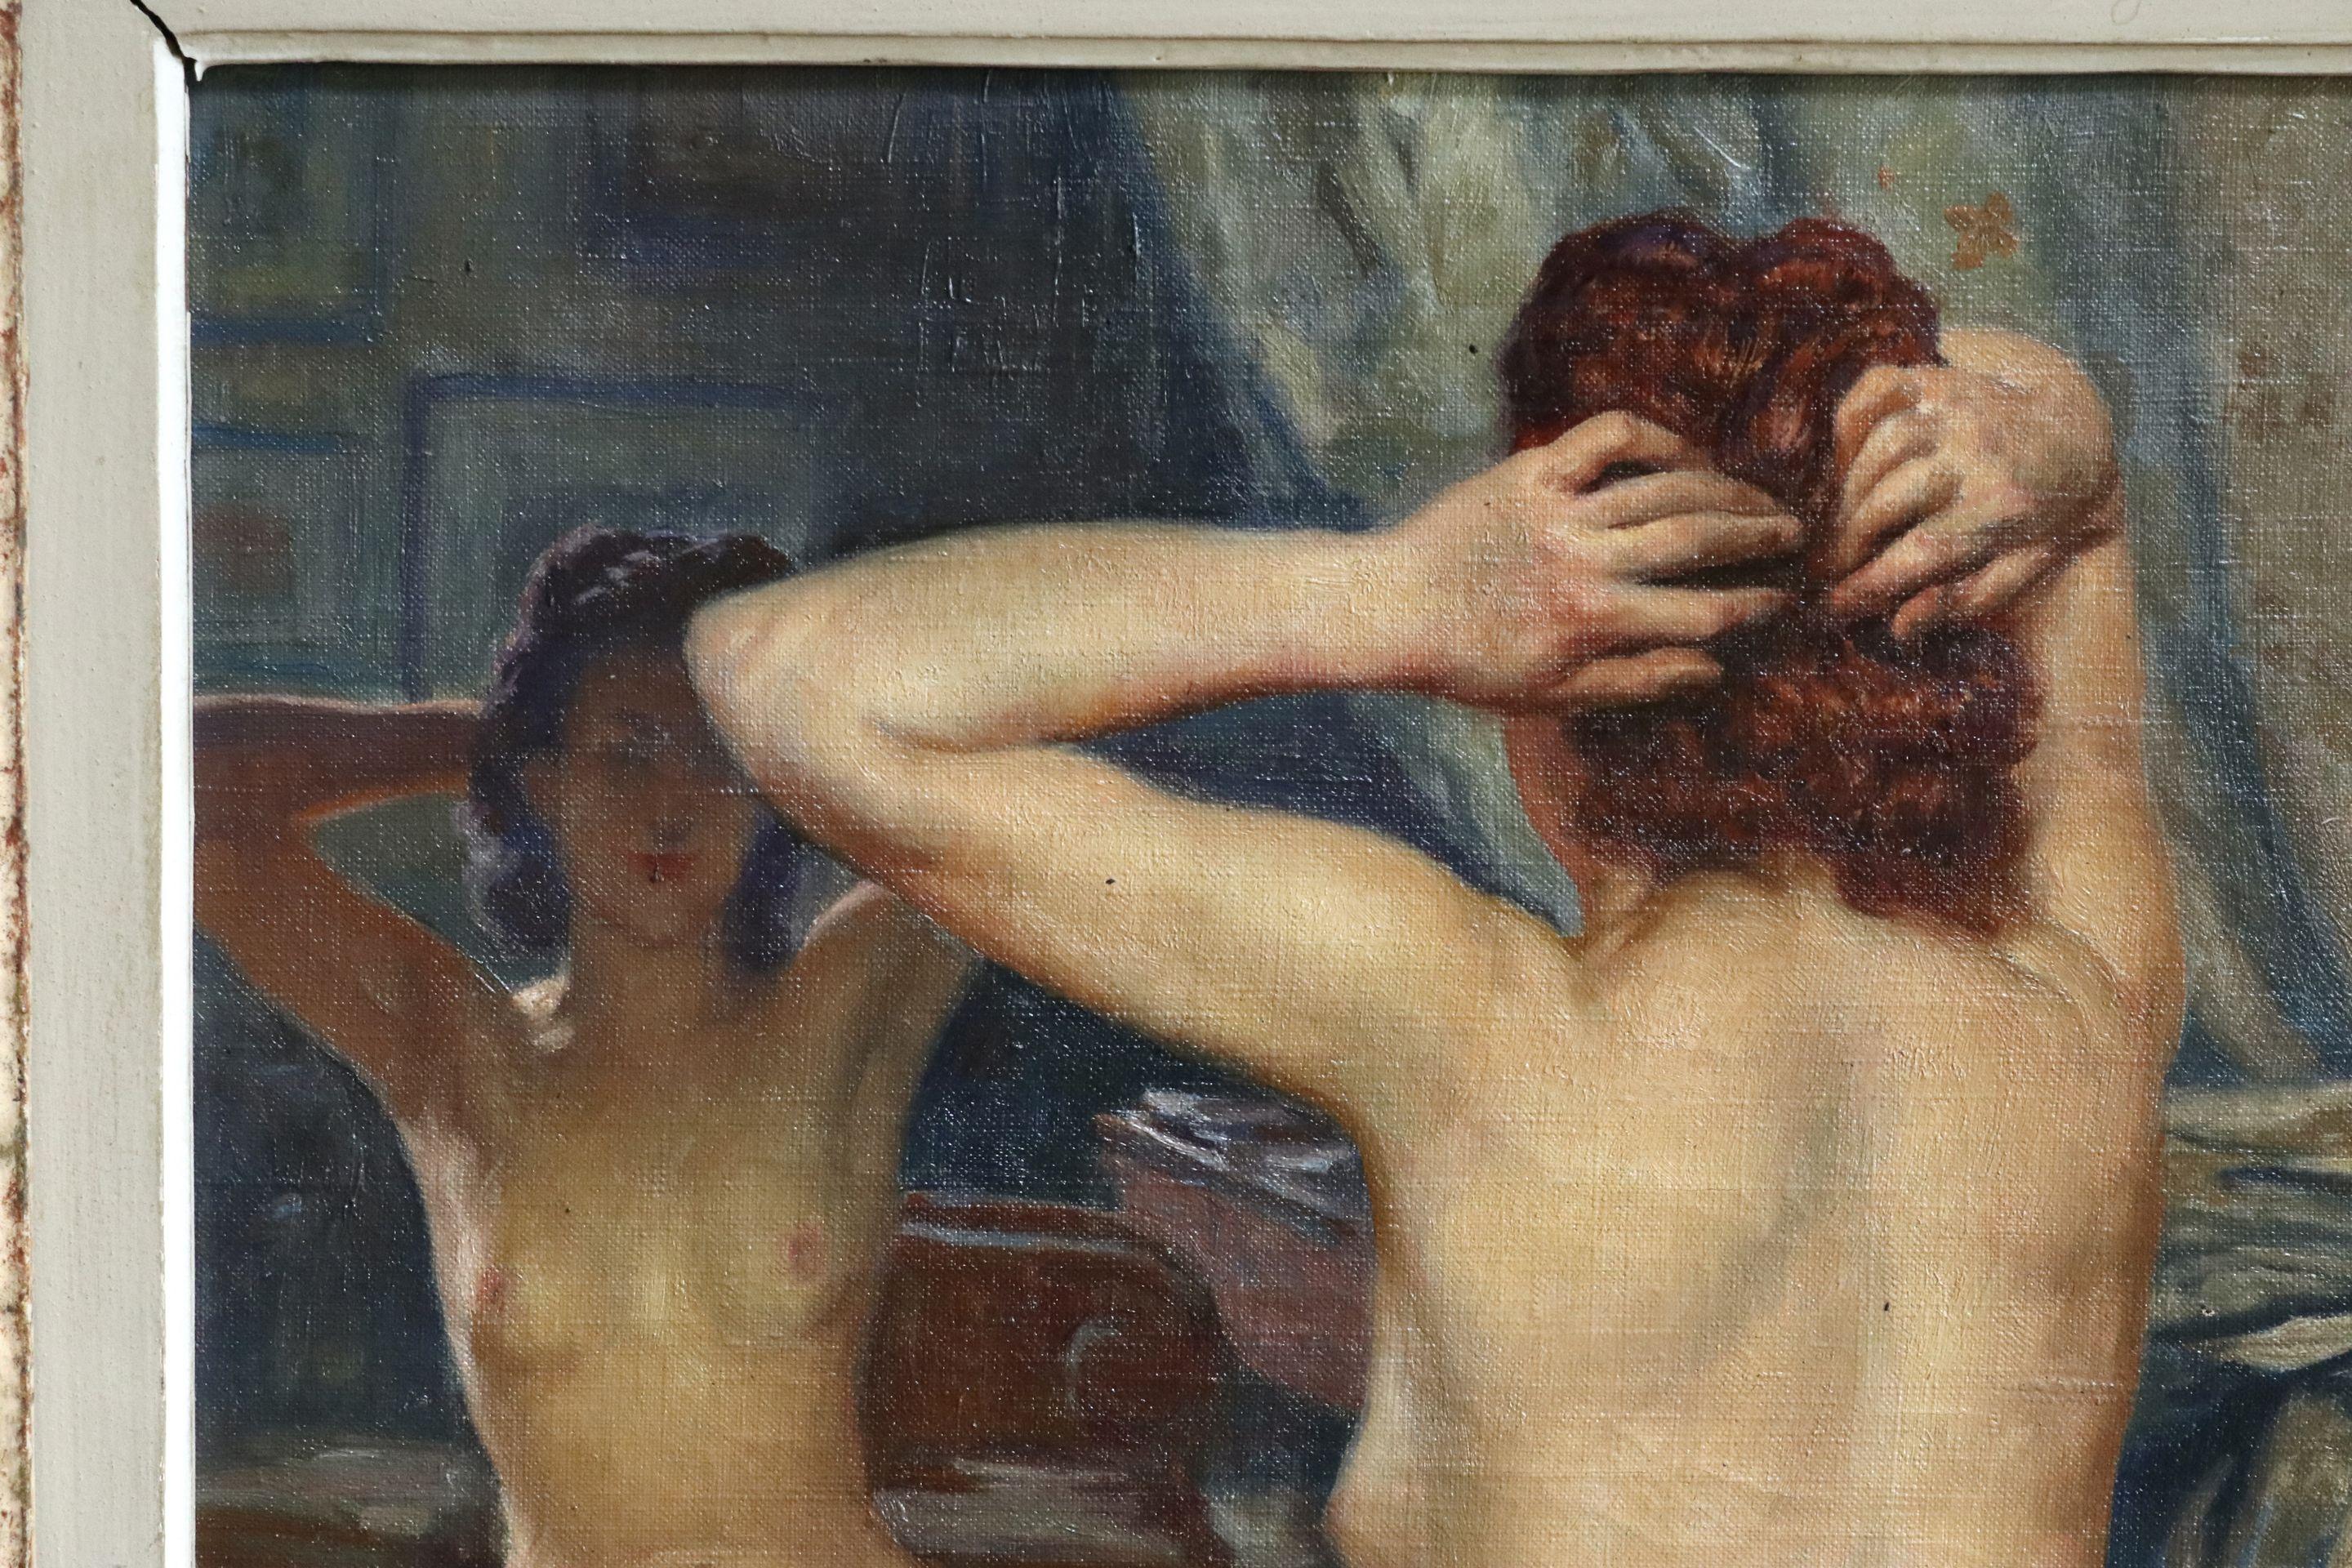 Oil on canvas circa 1920 by Paul Sieffert of a nude doing her hair as she sits in front of a mirror in an elegant interior. Signed lower right and signed and numbered verso. Framed dimensions are 23.5 inches high by 20.5 inches wide.

Paul Sieffert,